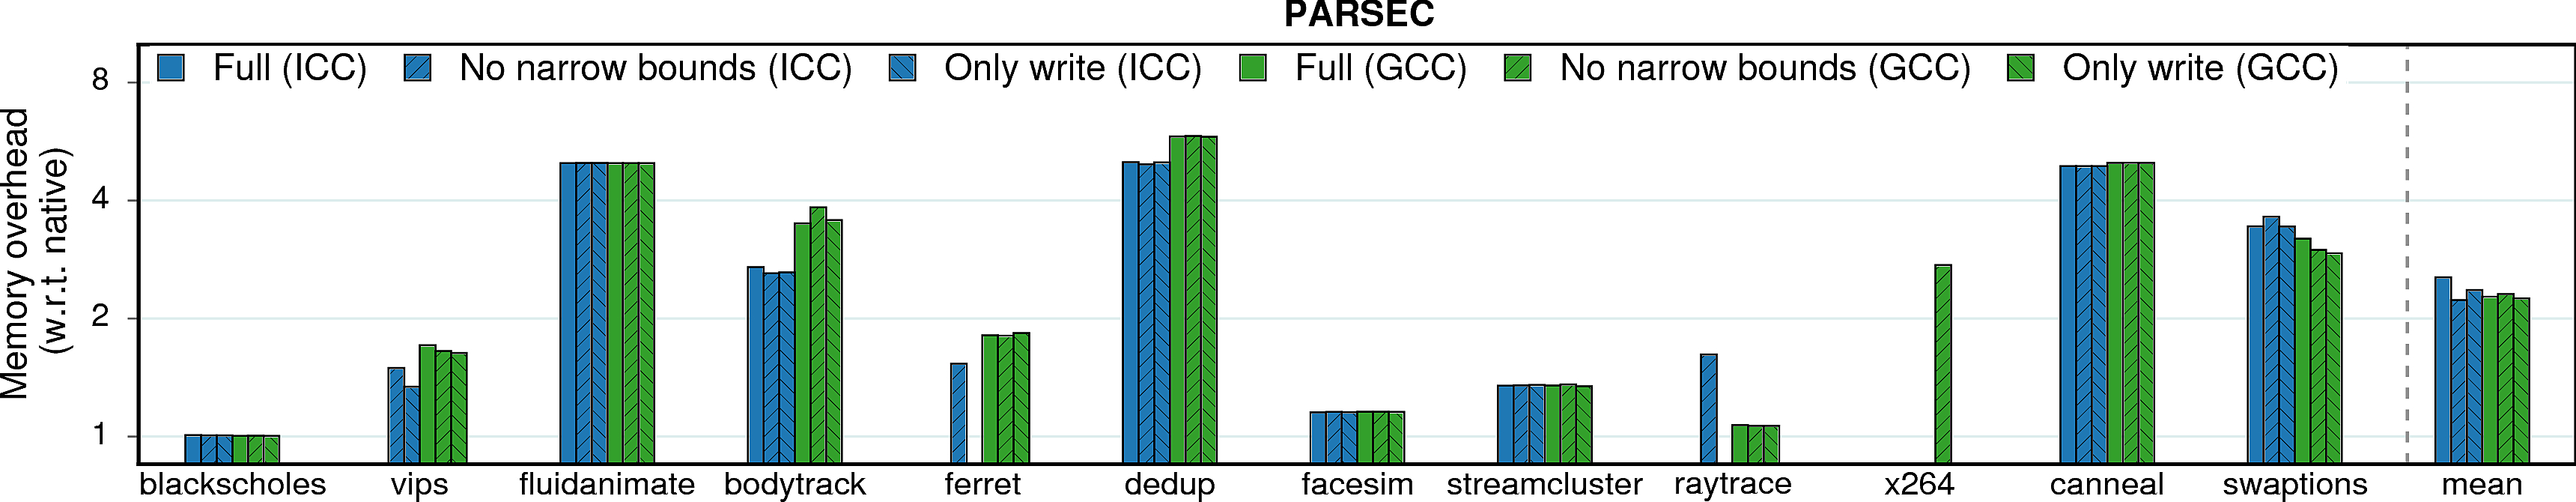 Memory consumption overheads of PARSEC